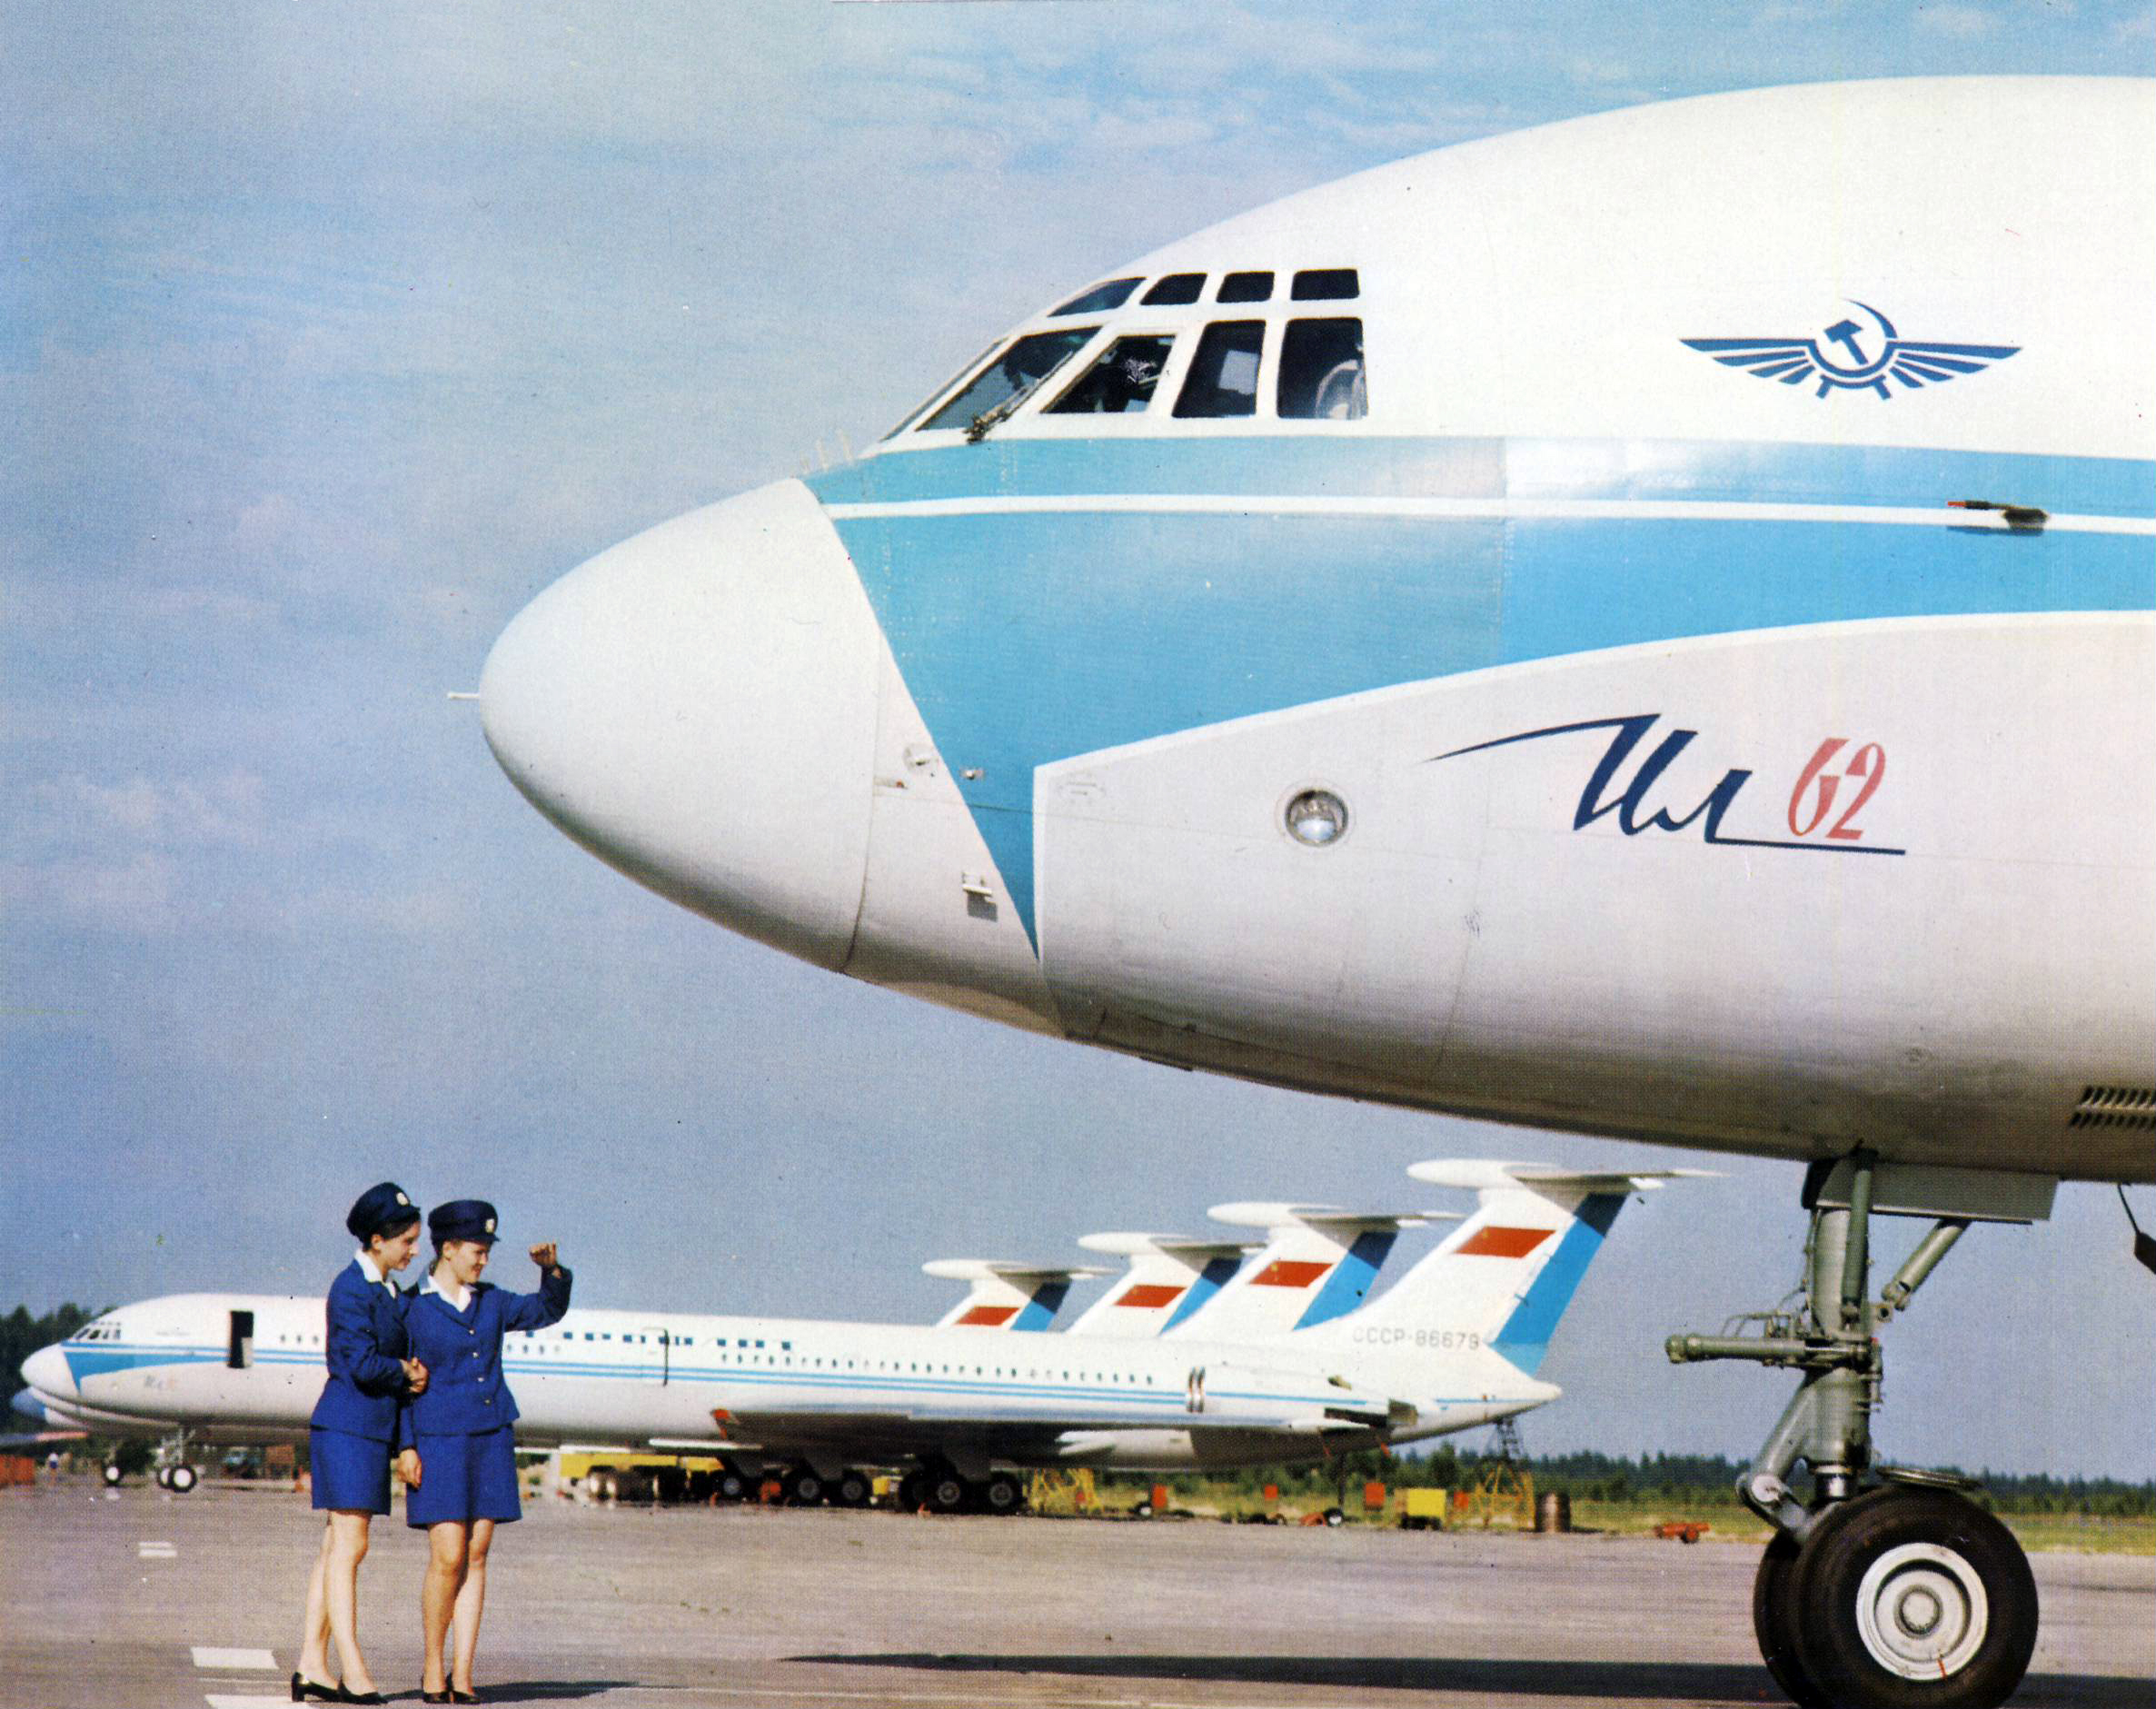 Il-62-promotional-photo-from-the-early-1970s-Aeroflot.jpg